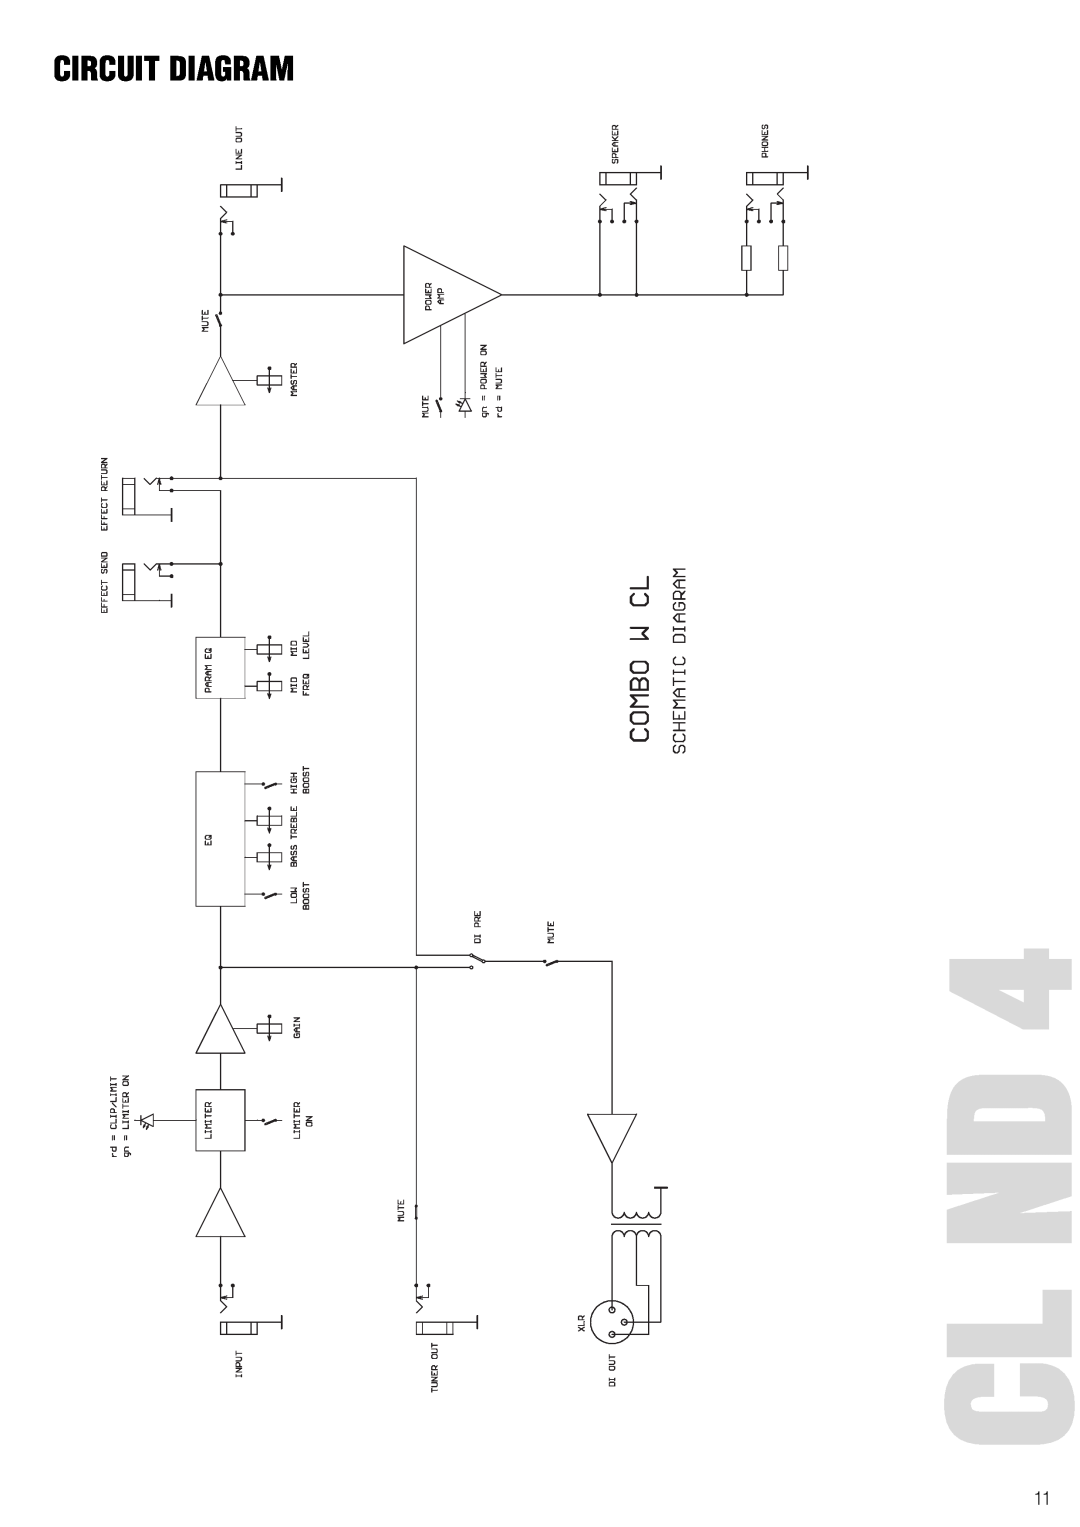 Warwick CL / CCL owner manual Cl Nd, Circuit Diagram 